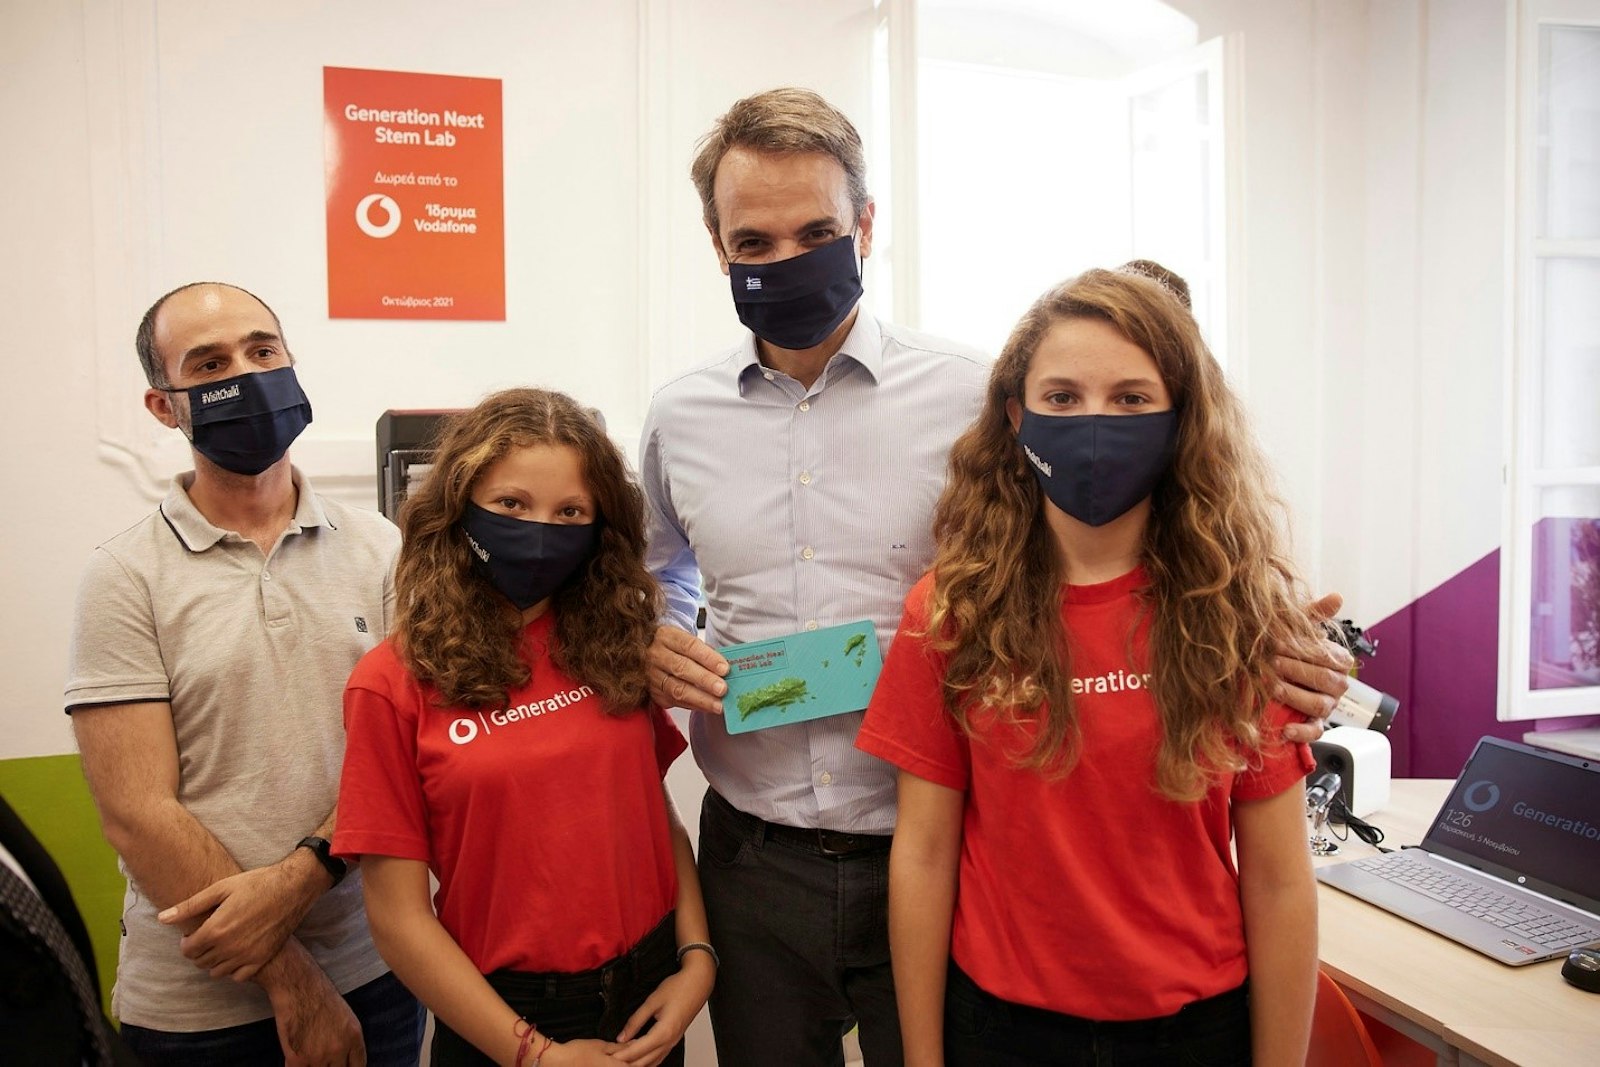 Greece’s Prime Minister Kyriakos Mitsotakis with students from Vodafone’s Generation Next programme